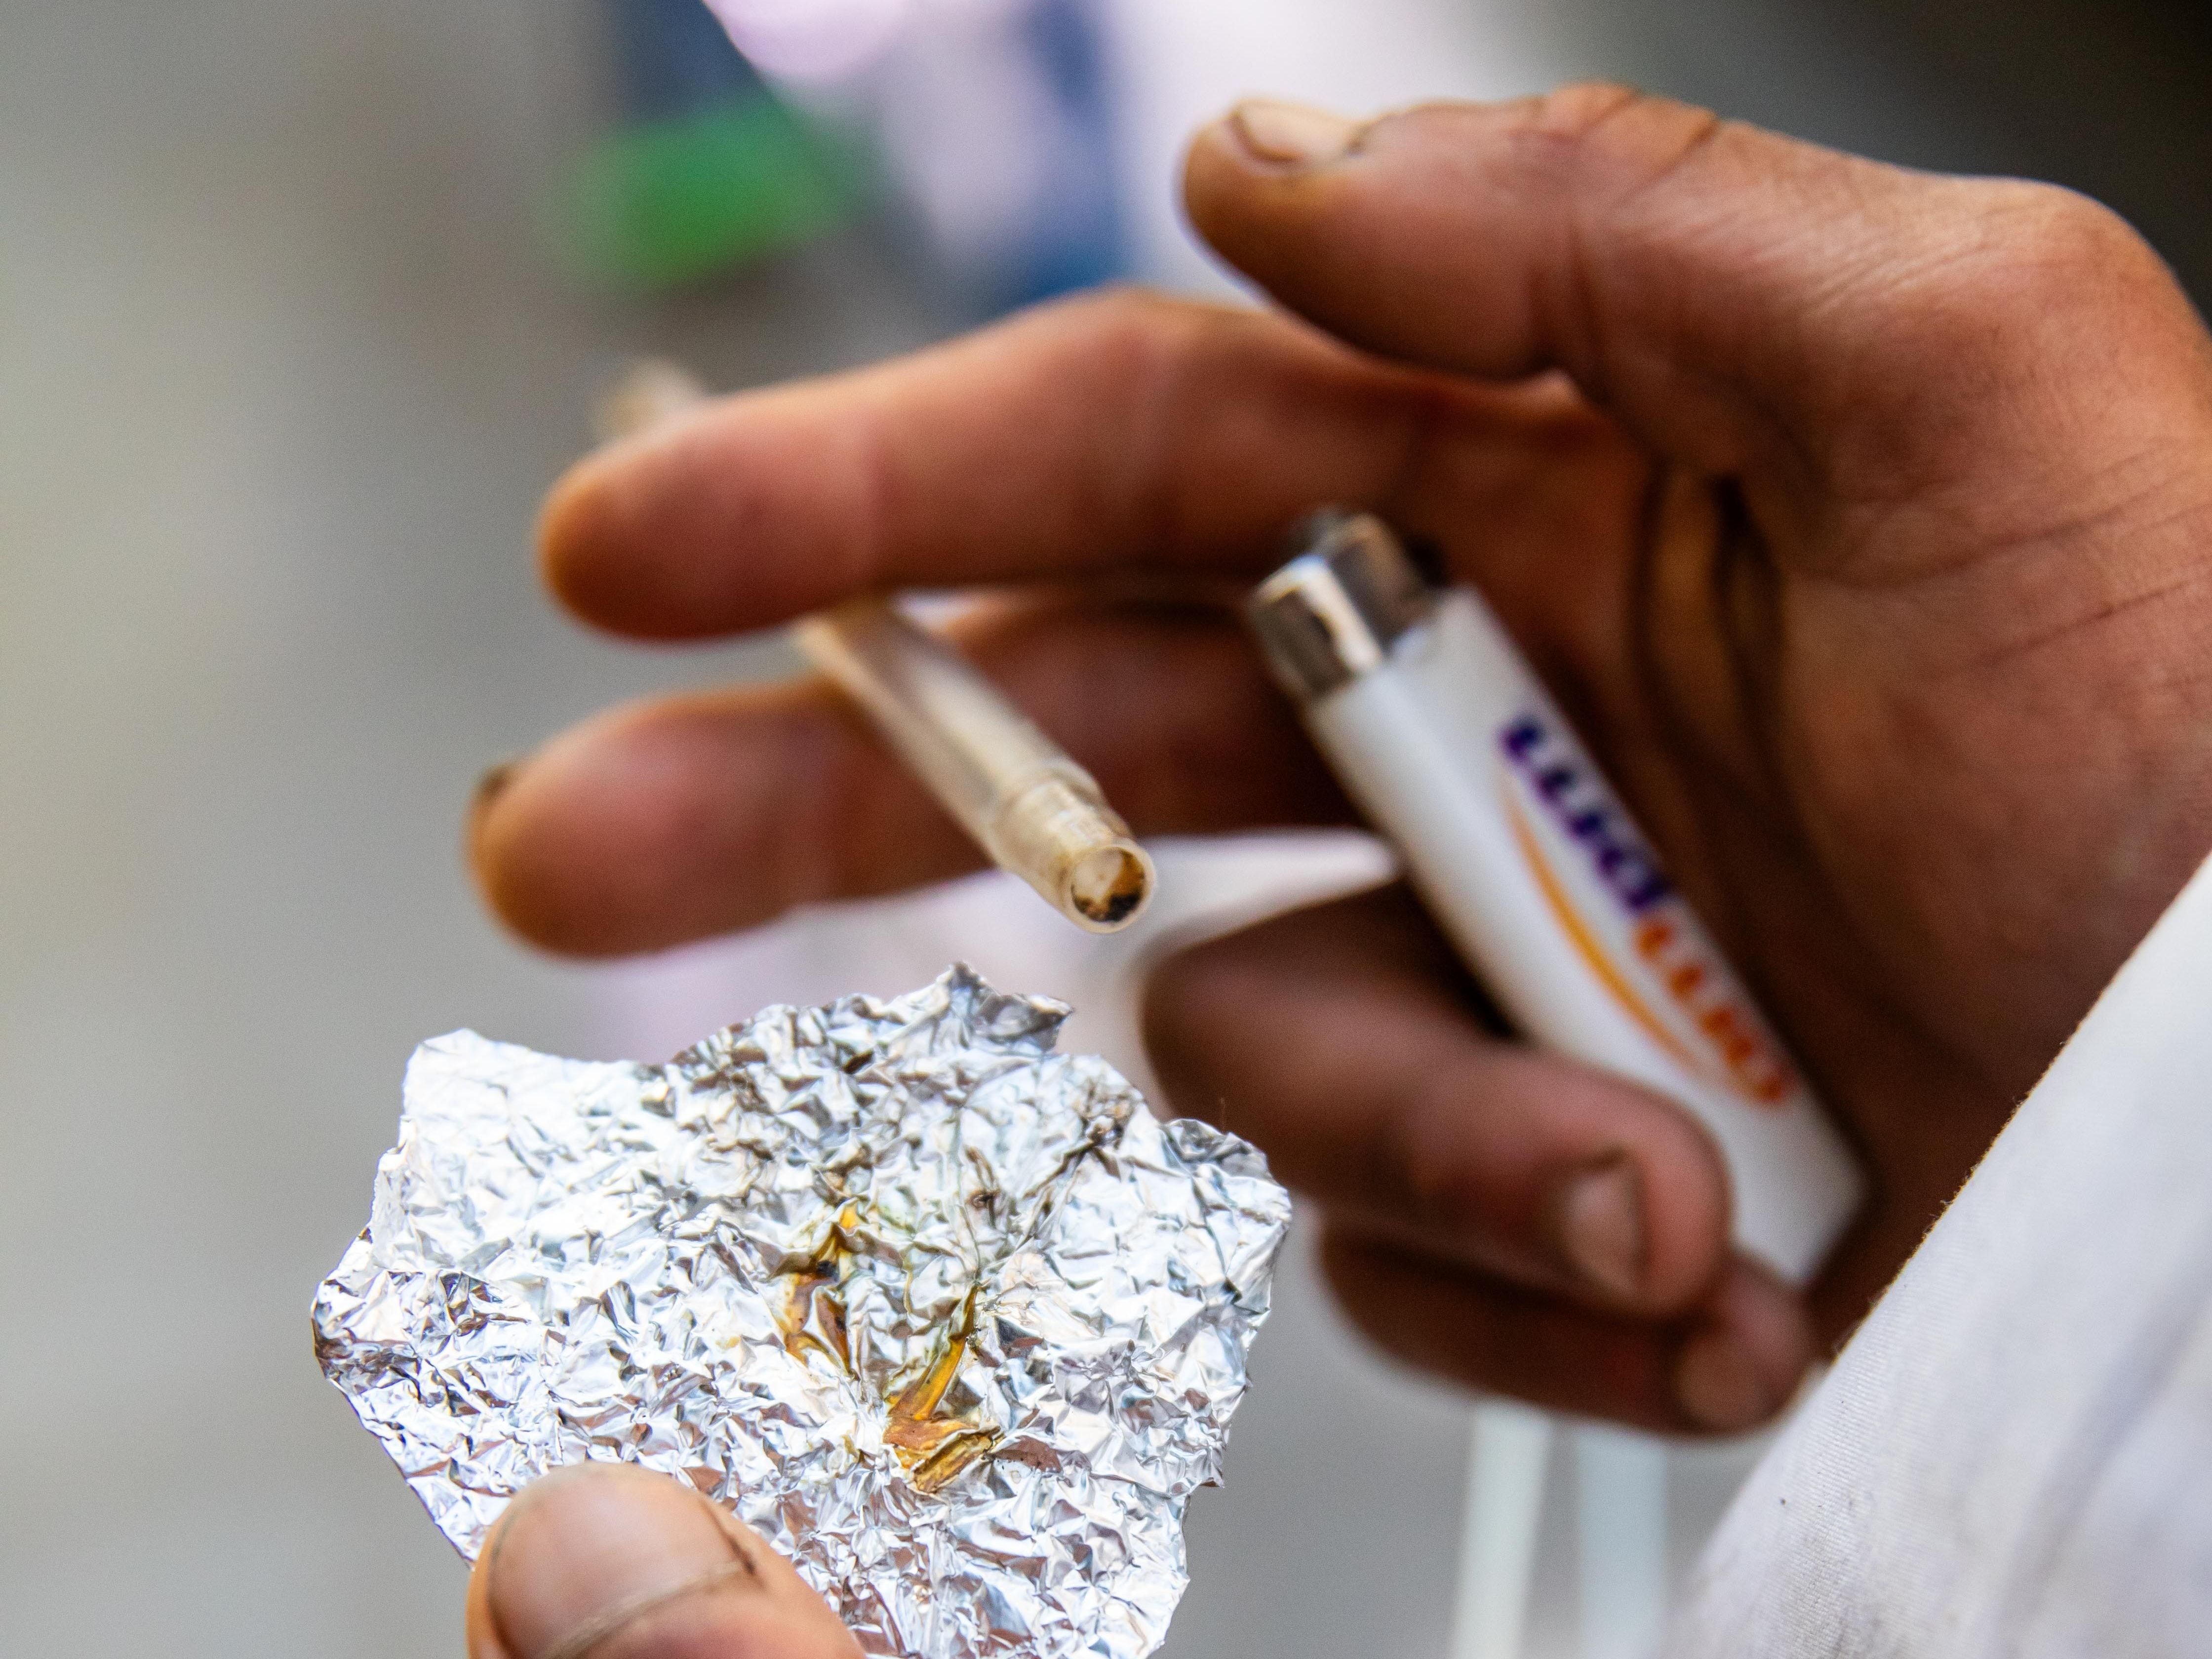 Two County Commissioners Demand Health Department Delay Plans to Distribute  Foil to Fentanyl Smokers